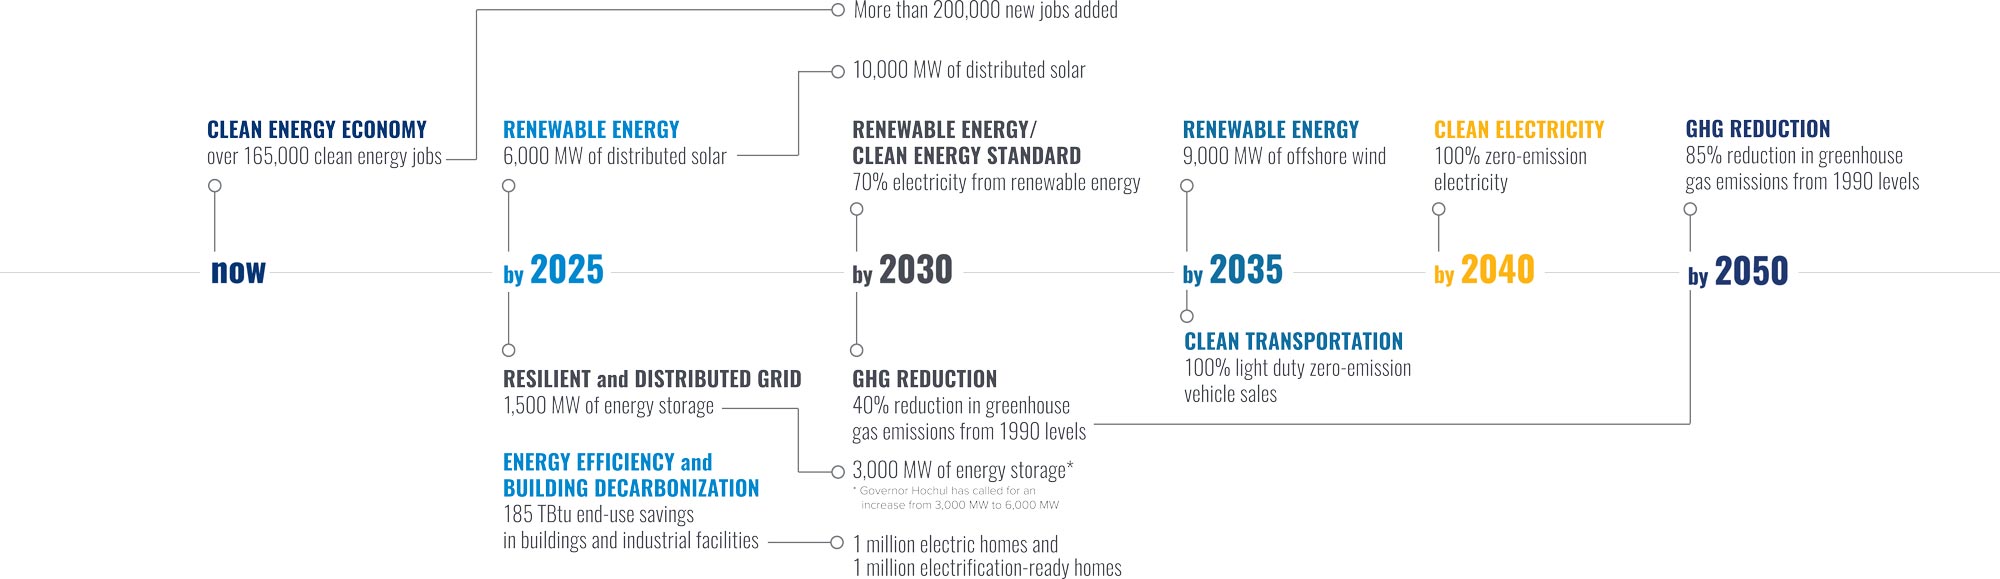 Timeline showing New York's climate goals.